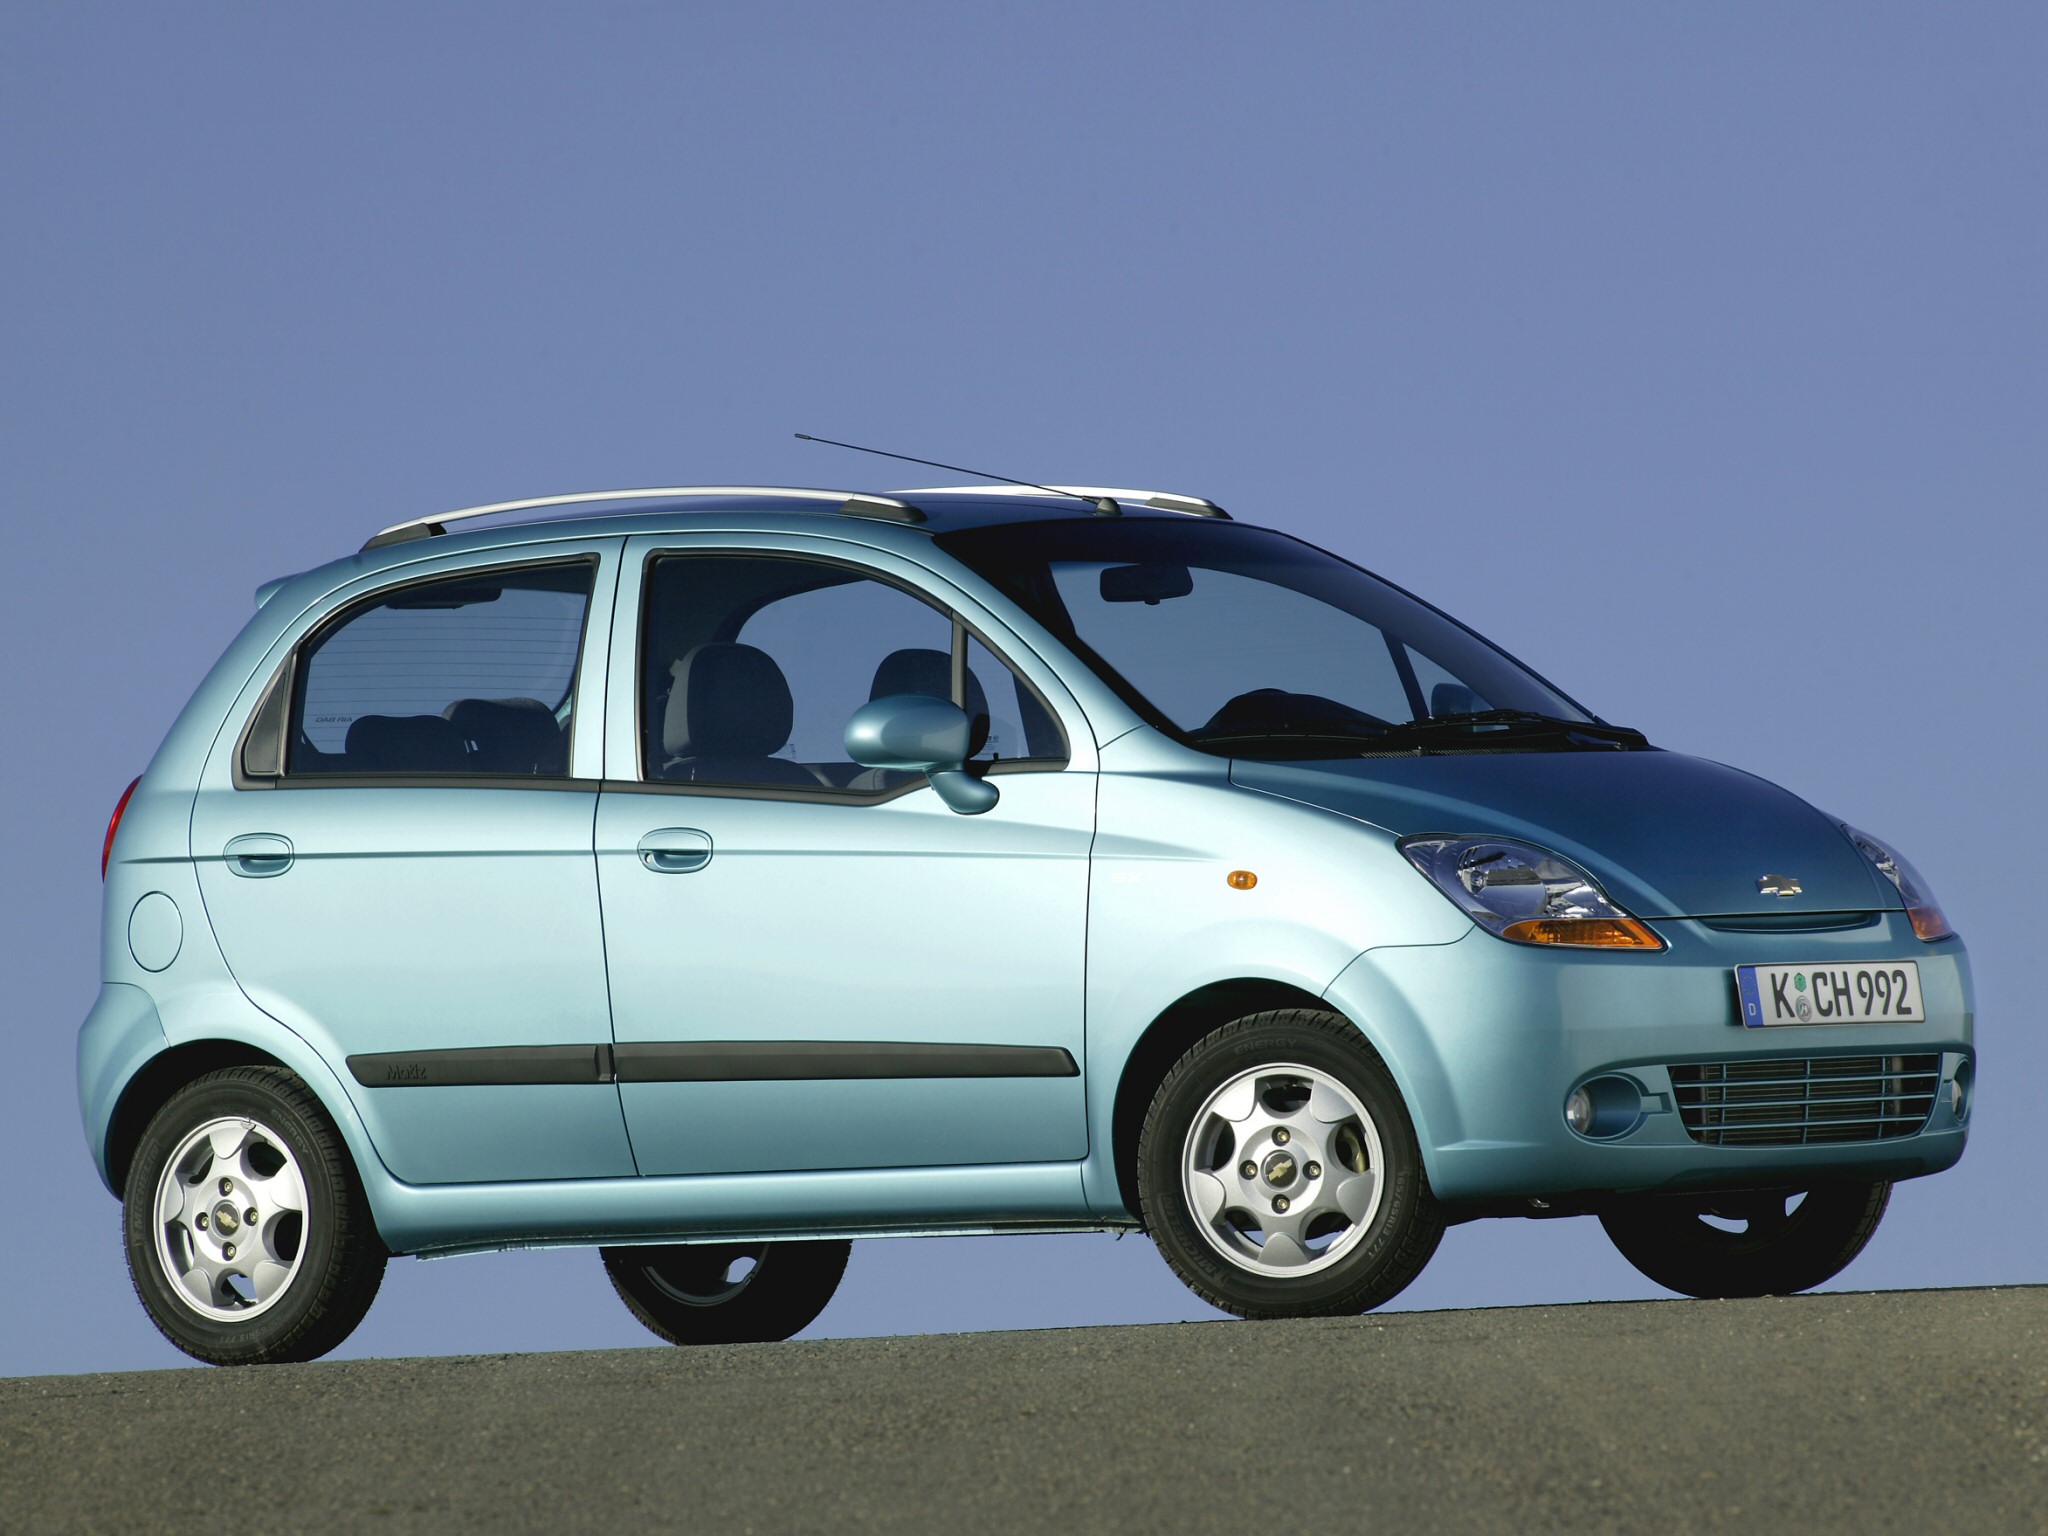 Car in pictures car photo gallery » Chevrolet Spark 2005